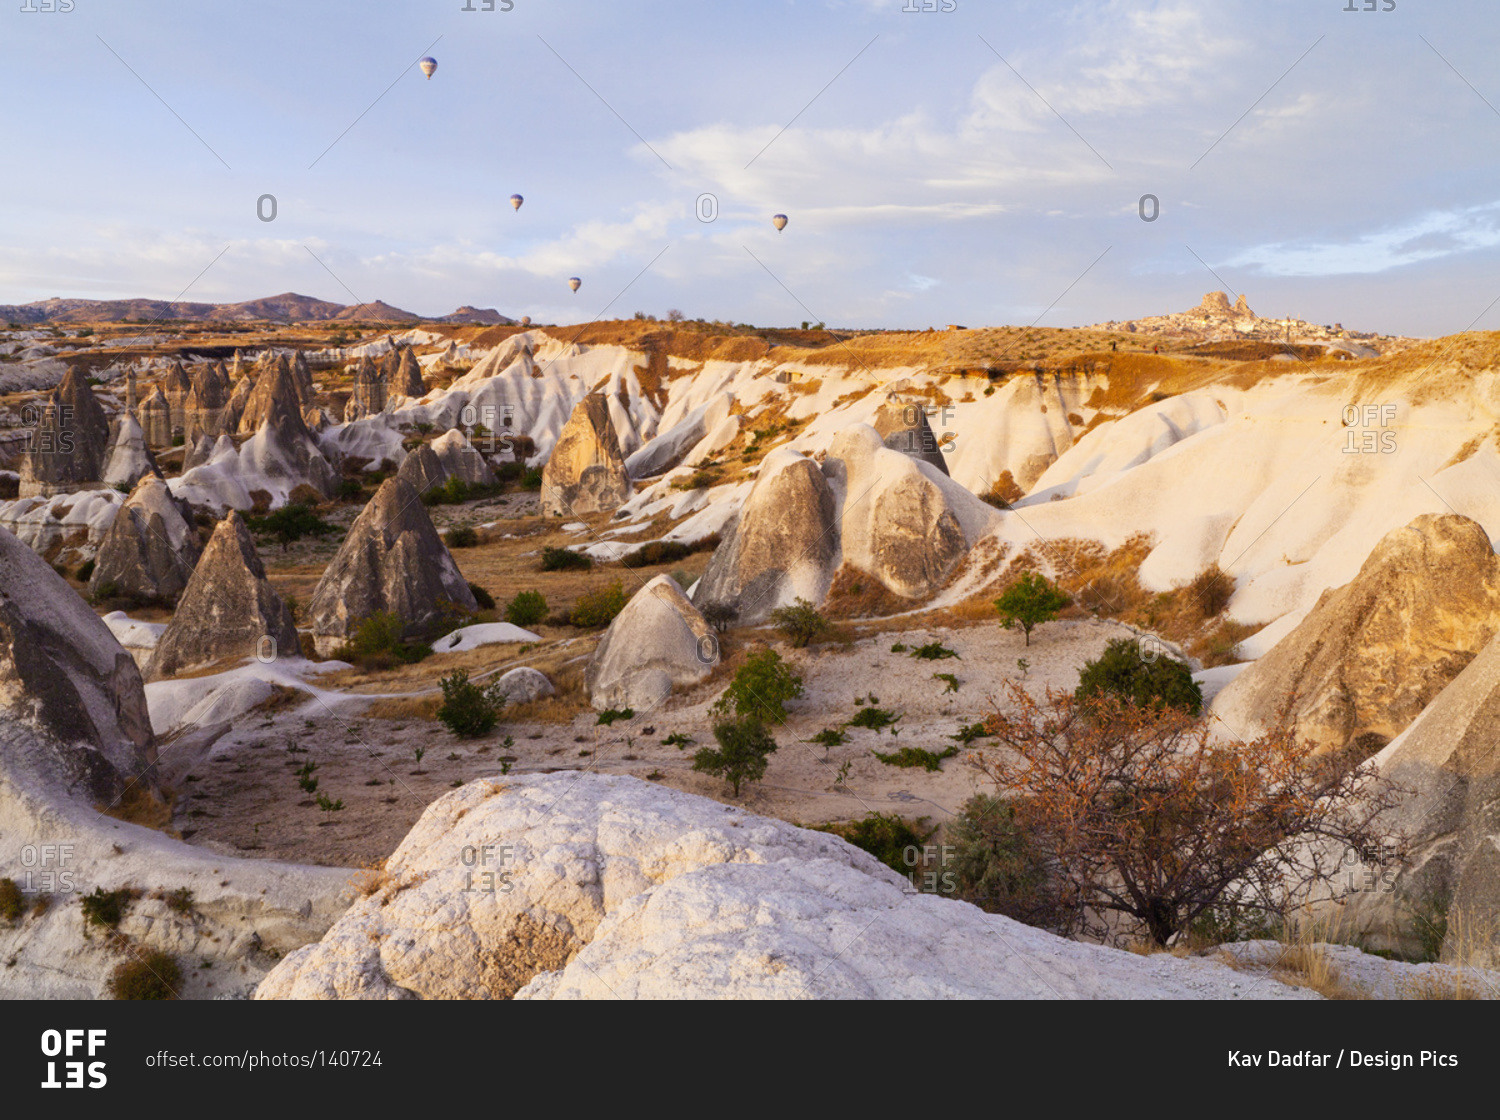 Hot air balloons over a landscape of rugged rock formations and cliffs, Goreme, Cappadocia, Turkey